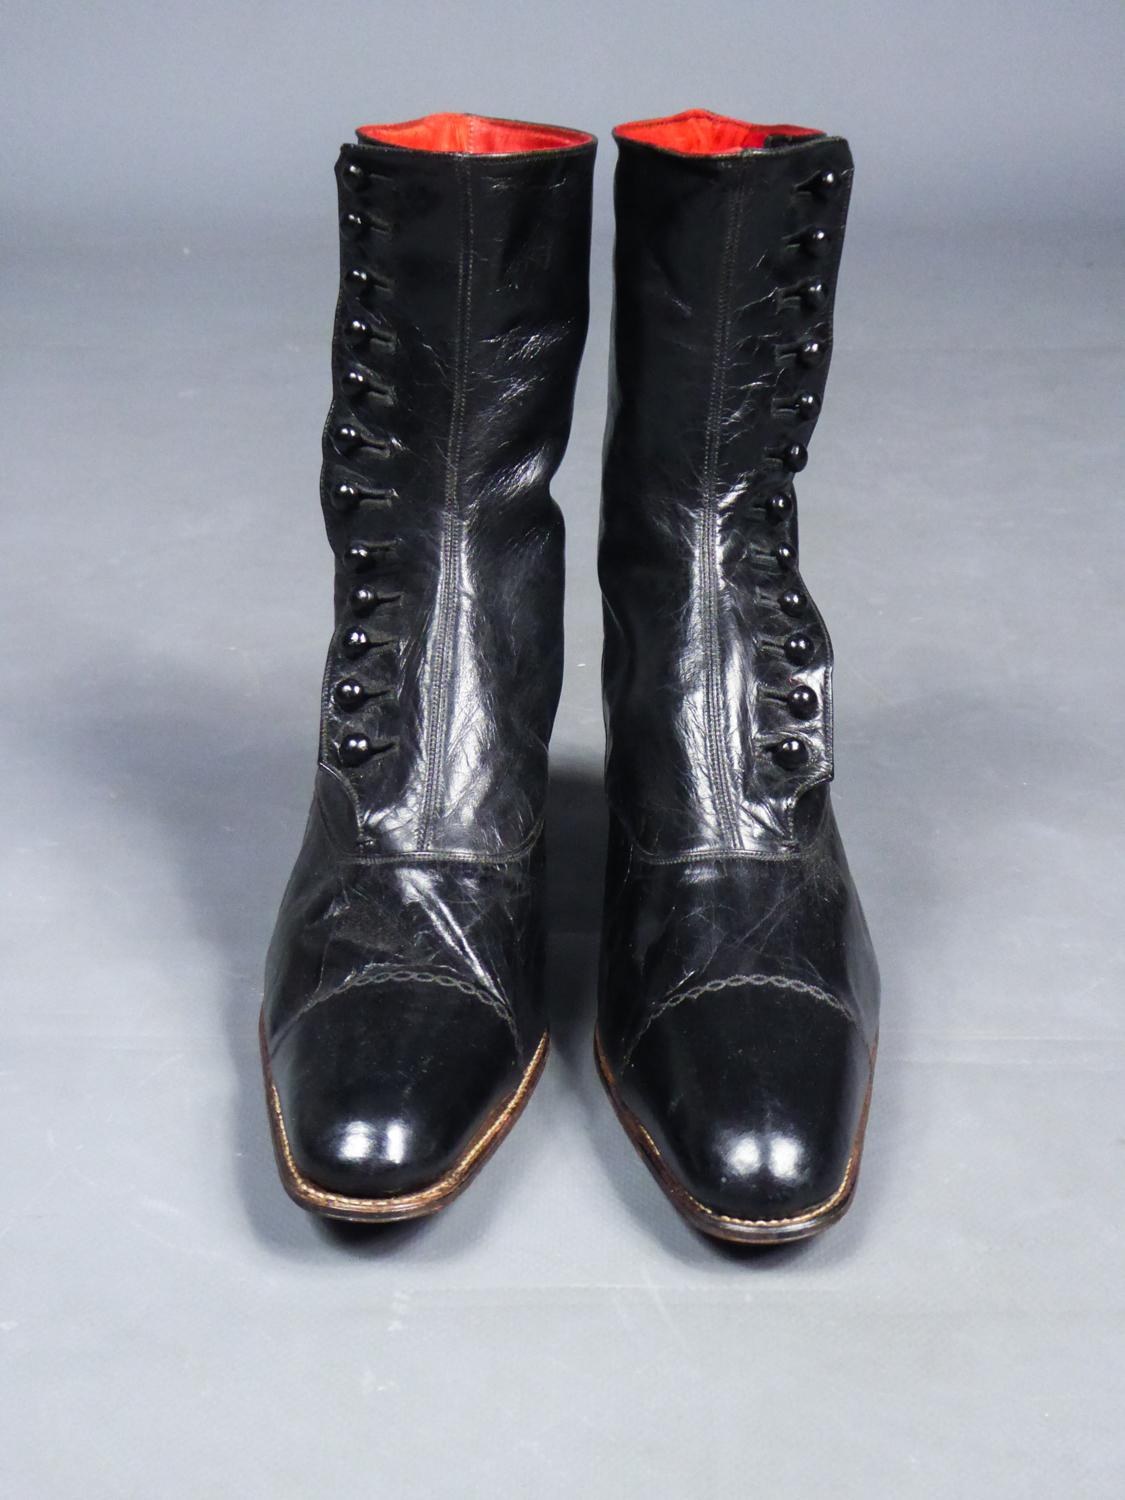 Circa 1895/1900
France

A never used Pair of Leather City Boots from a store back in the South West of France and dating from the Belle Epoque. Shiny black leather with pointed toe, studded coil heel in sole and lined with cotton twill underlined